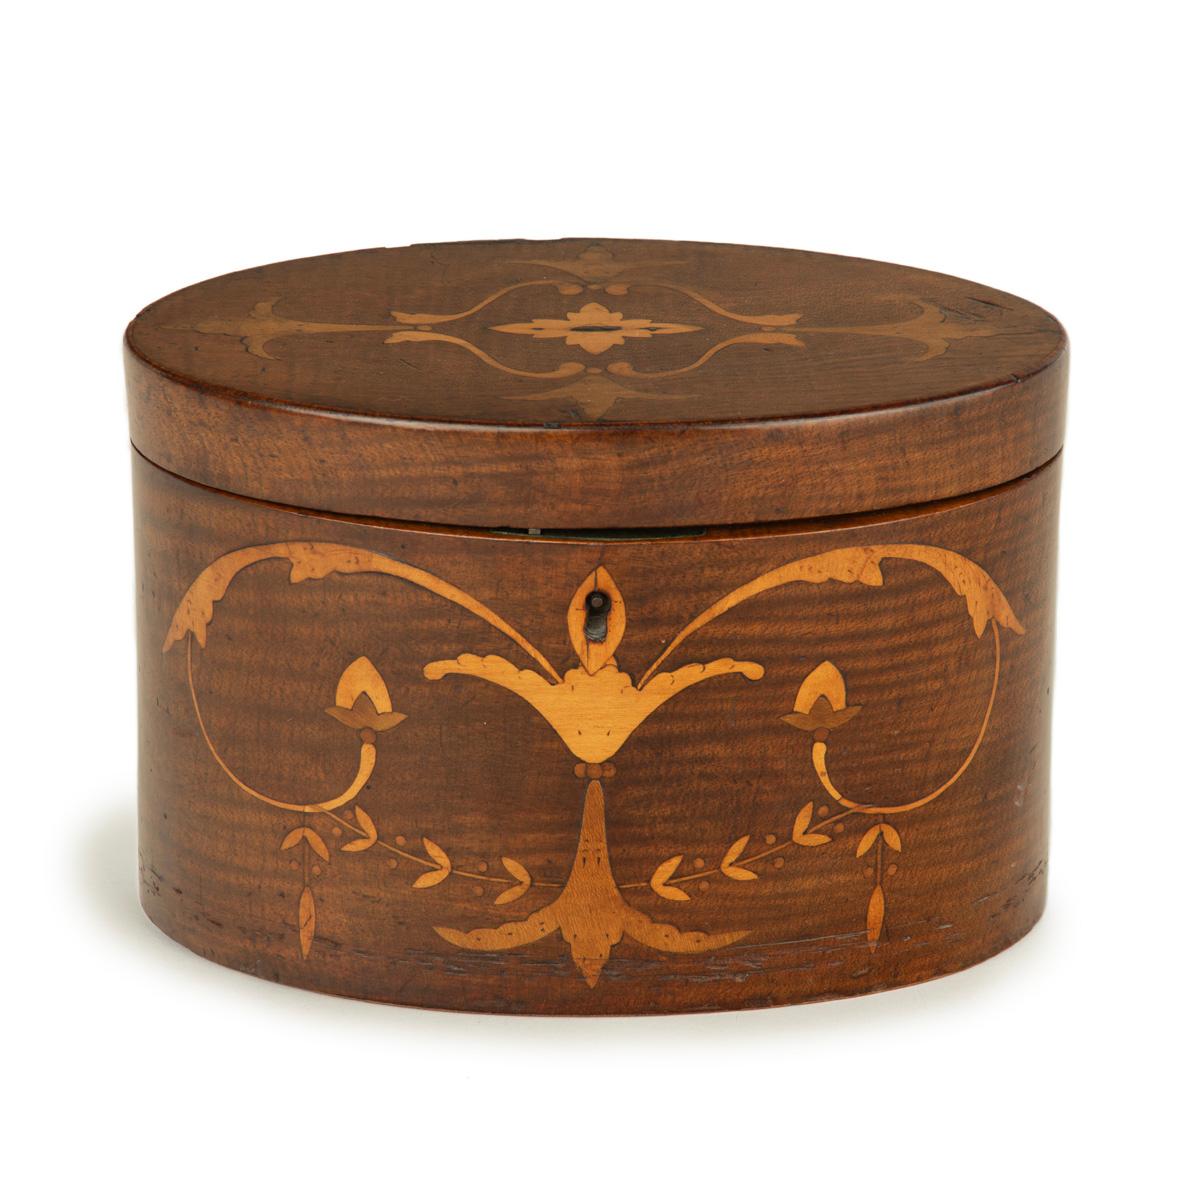 A harewood marquetry tea caddy with Royal Provenance, of oval form with a hinged lid opening to reveal two zinc lined compartments, decorated in fruitwood and boxwood marquetry with classical motifs including winged palmettes and foliate scrolls, a